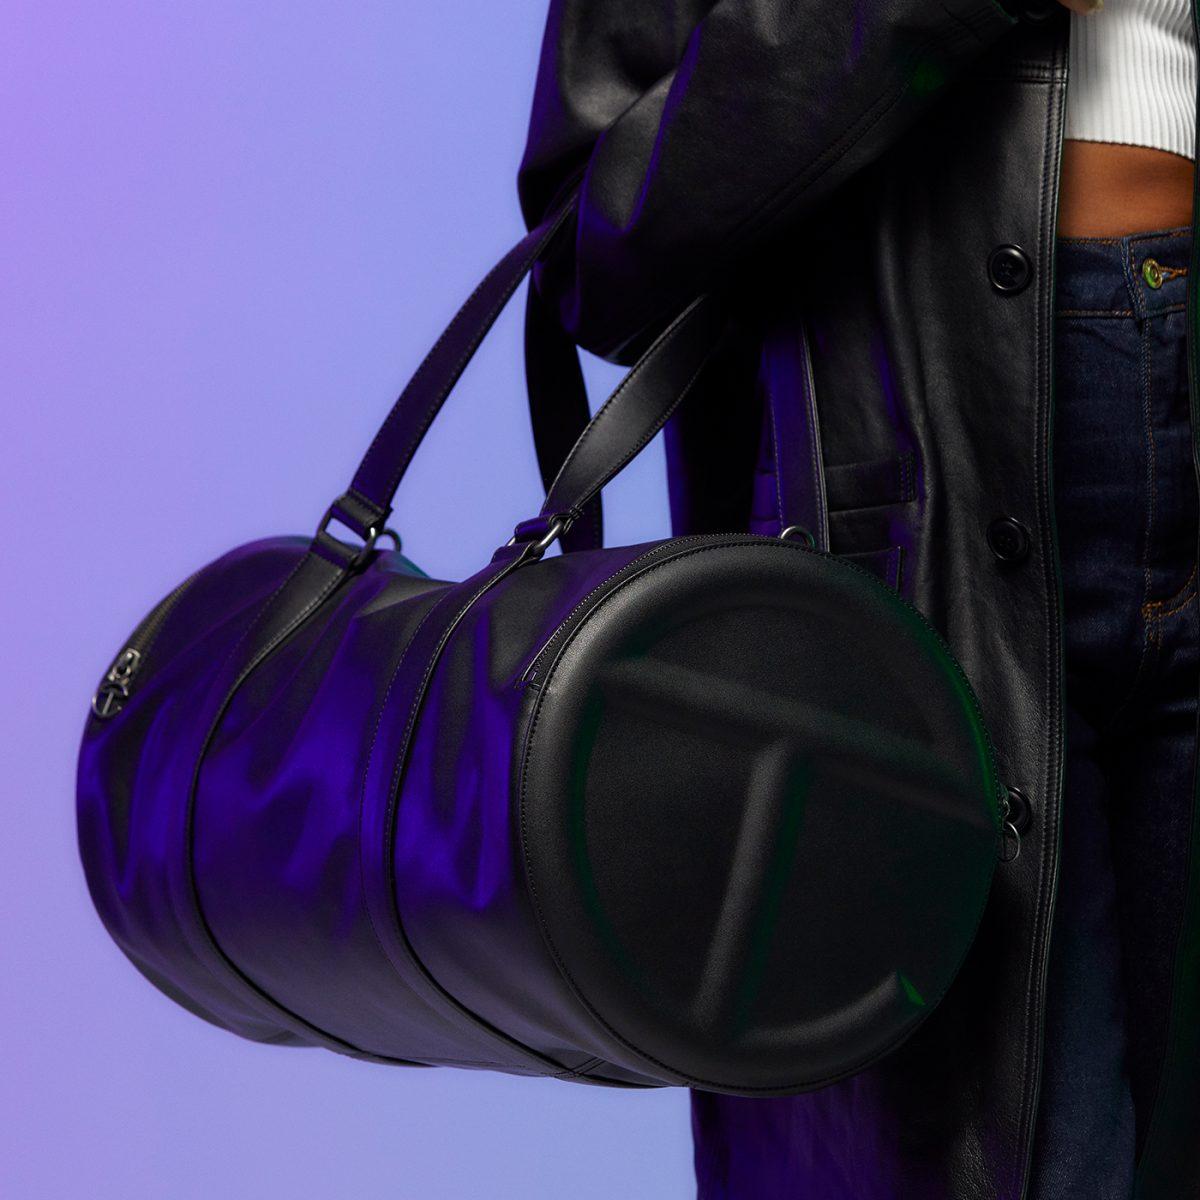 Designer Denim is Back With These Bags - StockX News